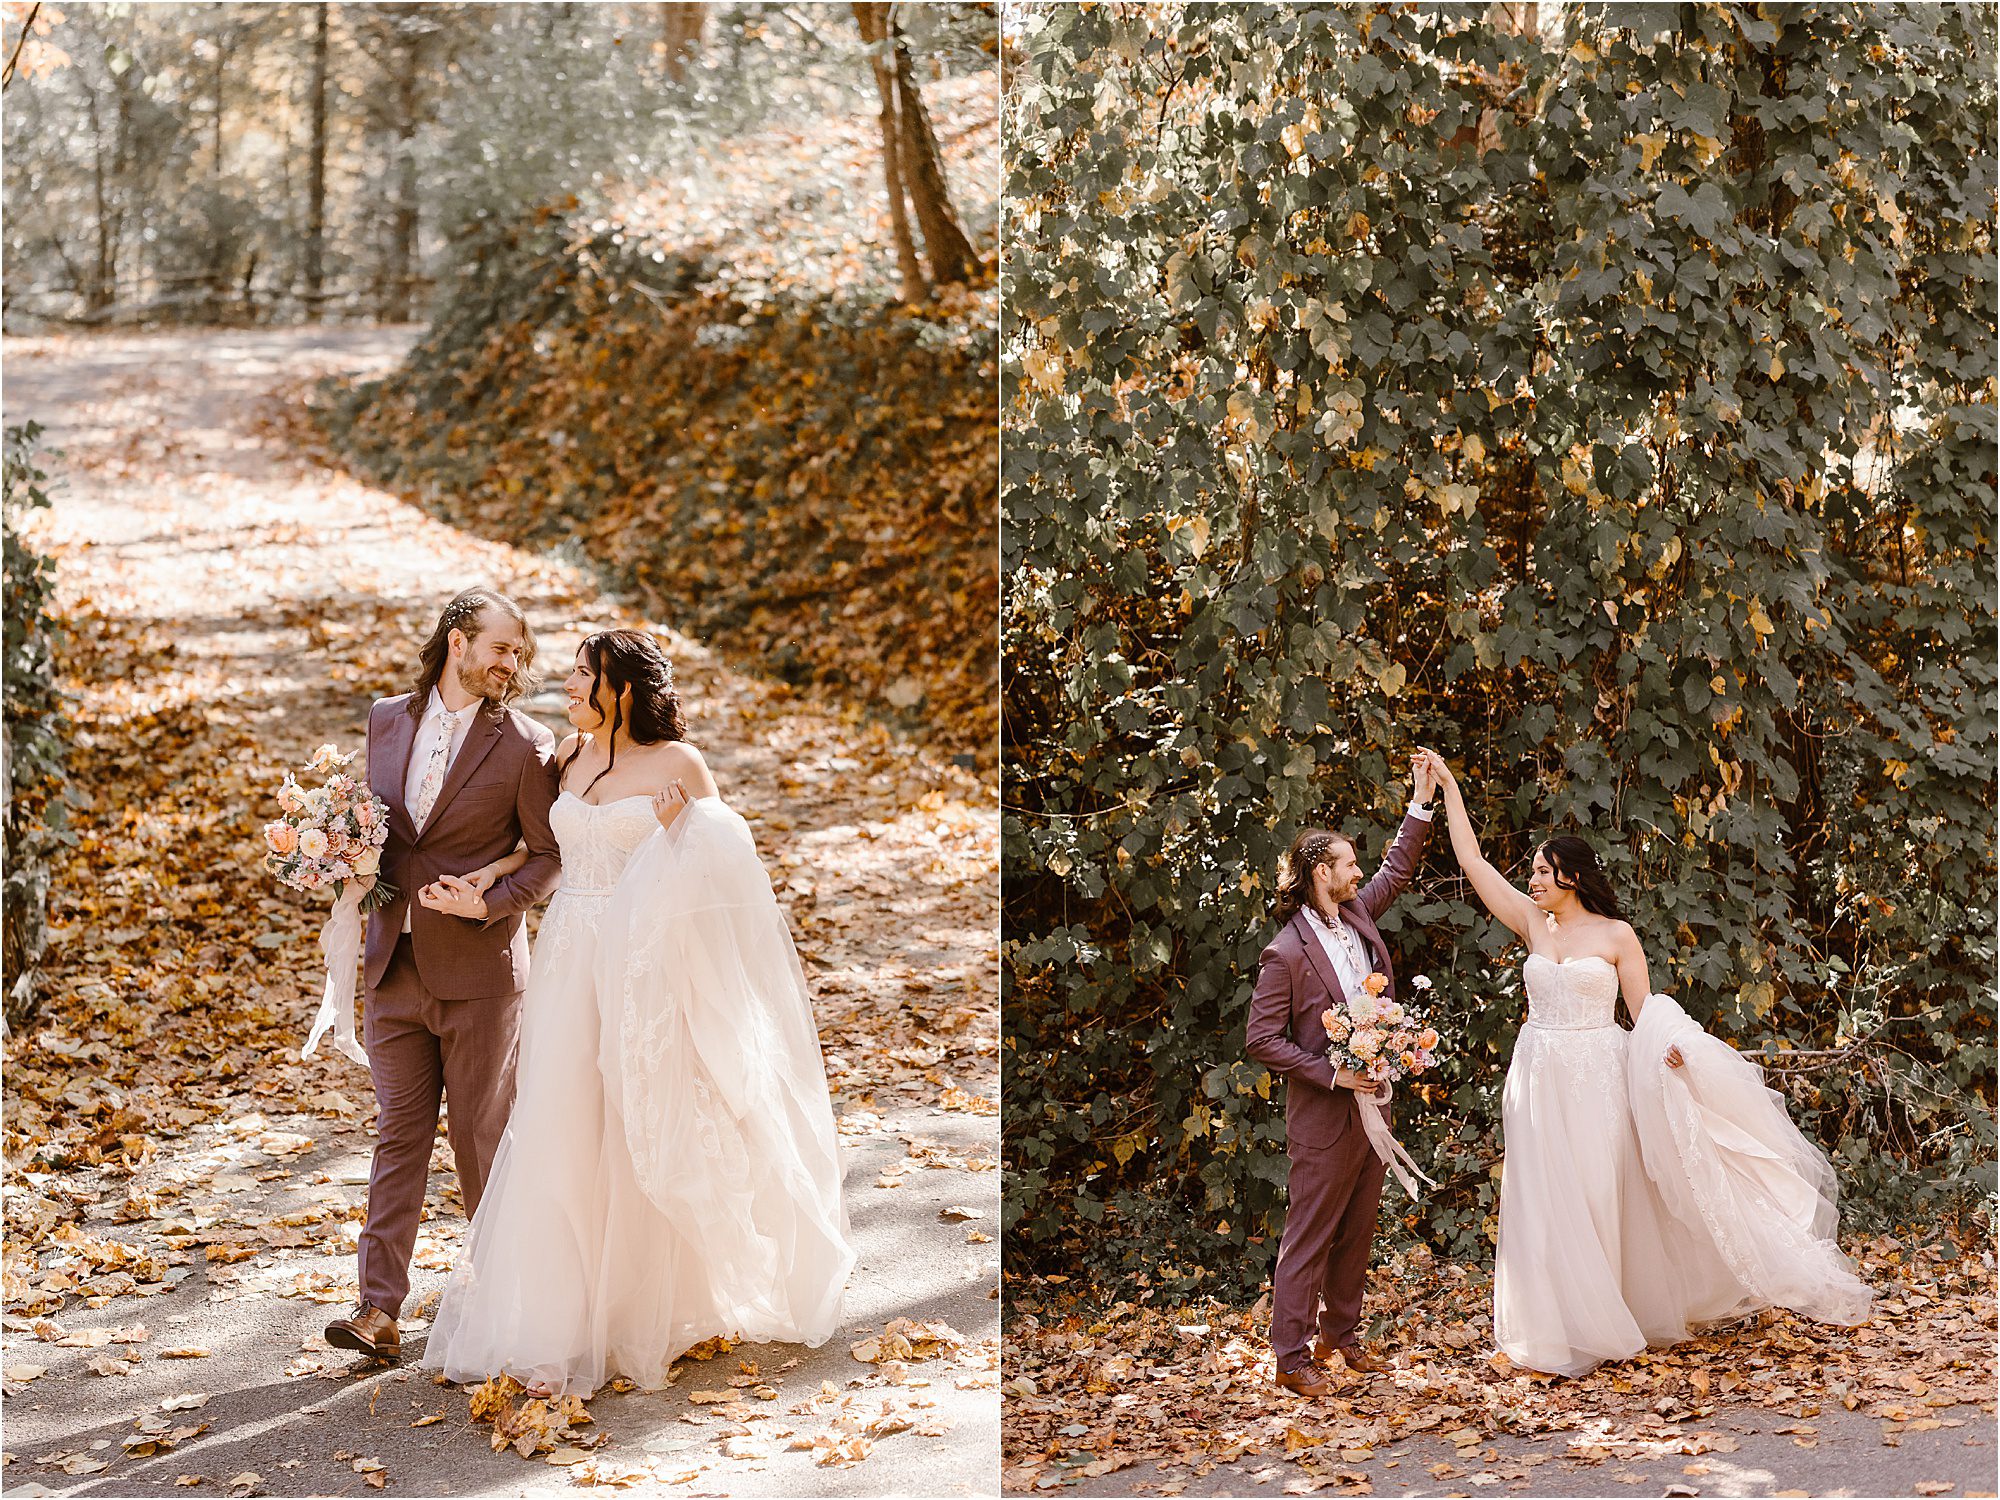 bride and groom dancing and walking along road with fall leaves near Kudzu vine